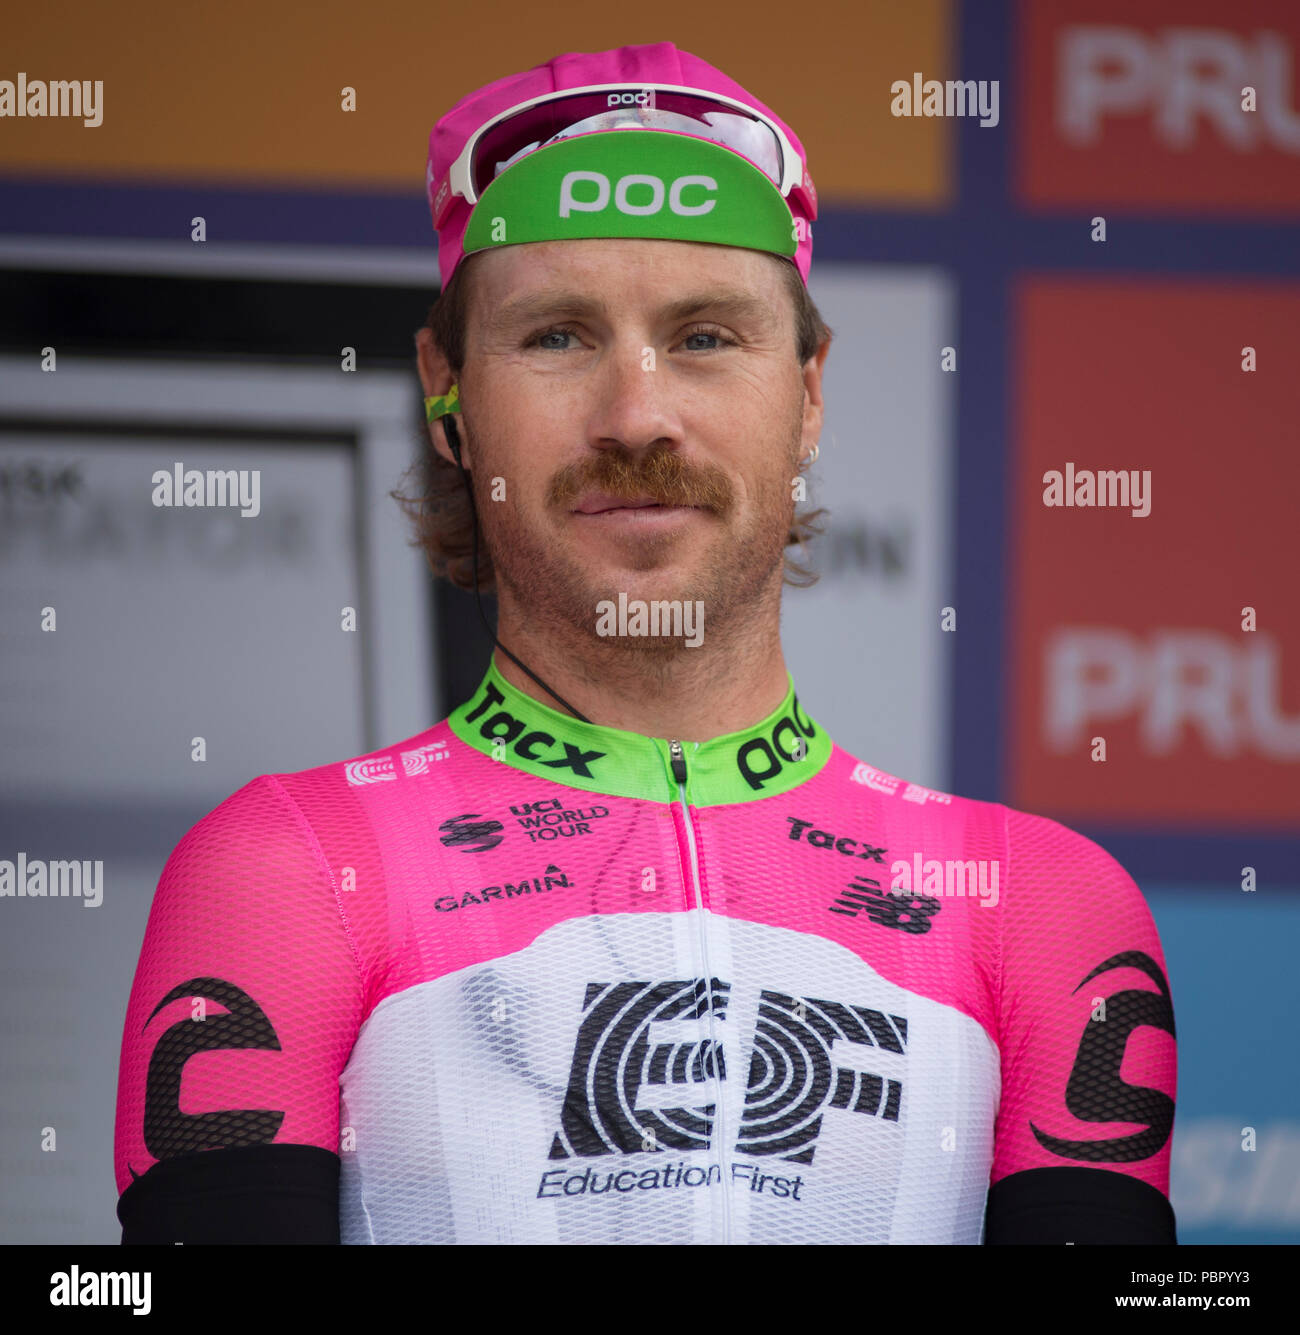 Horse Guards Parade, London, UK. 29 July, 2018. Britain’s only men’s UCI WorldTour race lines up for race start in central London with the riders and teams presented to spectators. Photo: Mitch Docker of EF Education First Drap ESP Team. Credit: Malcolm Park/Alamy Live News. Stock Photo